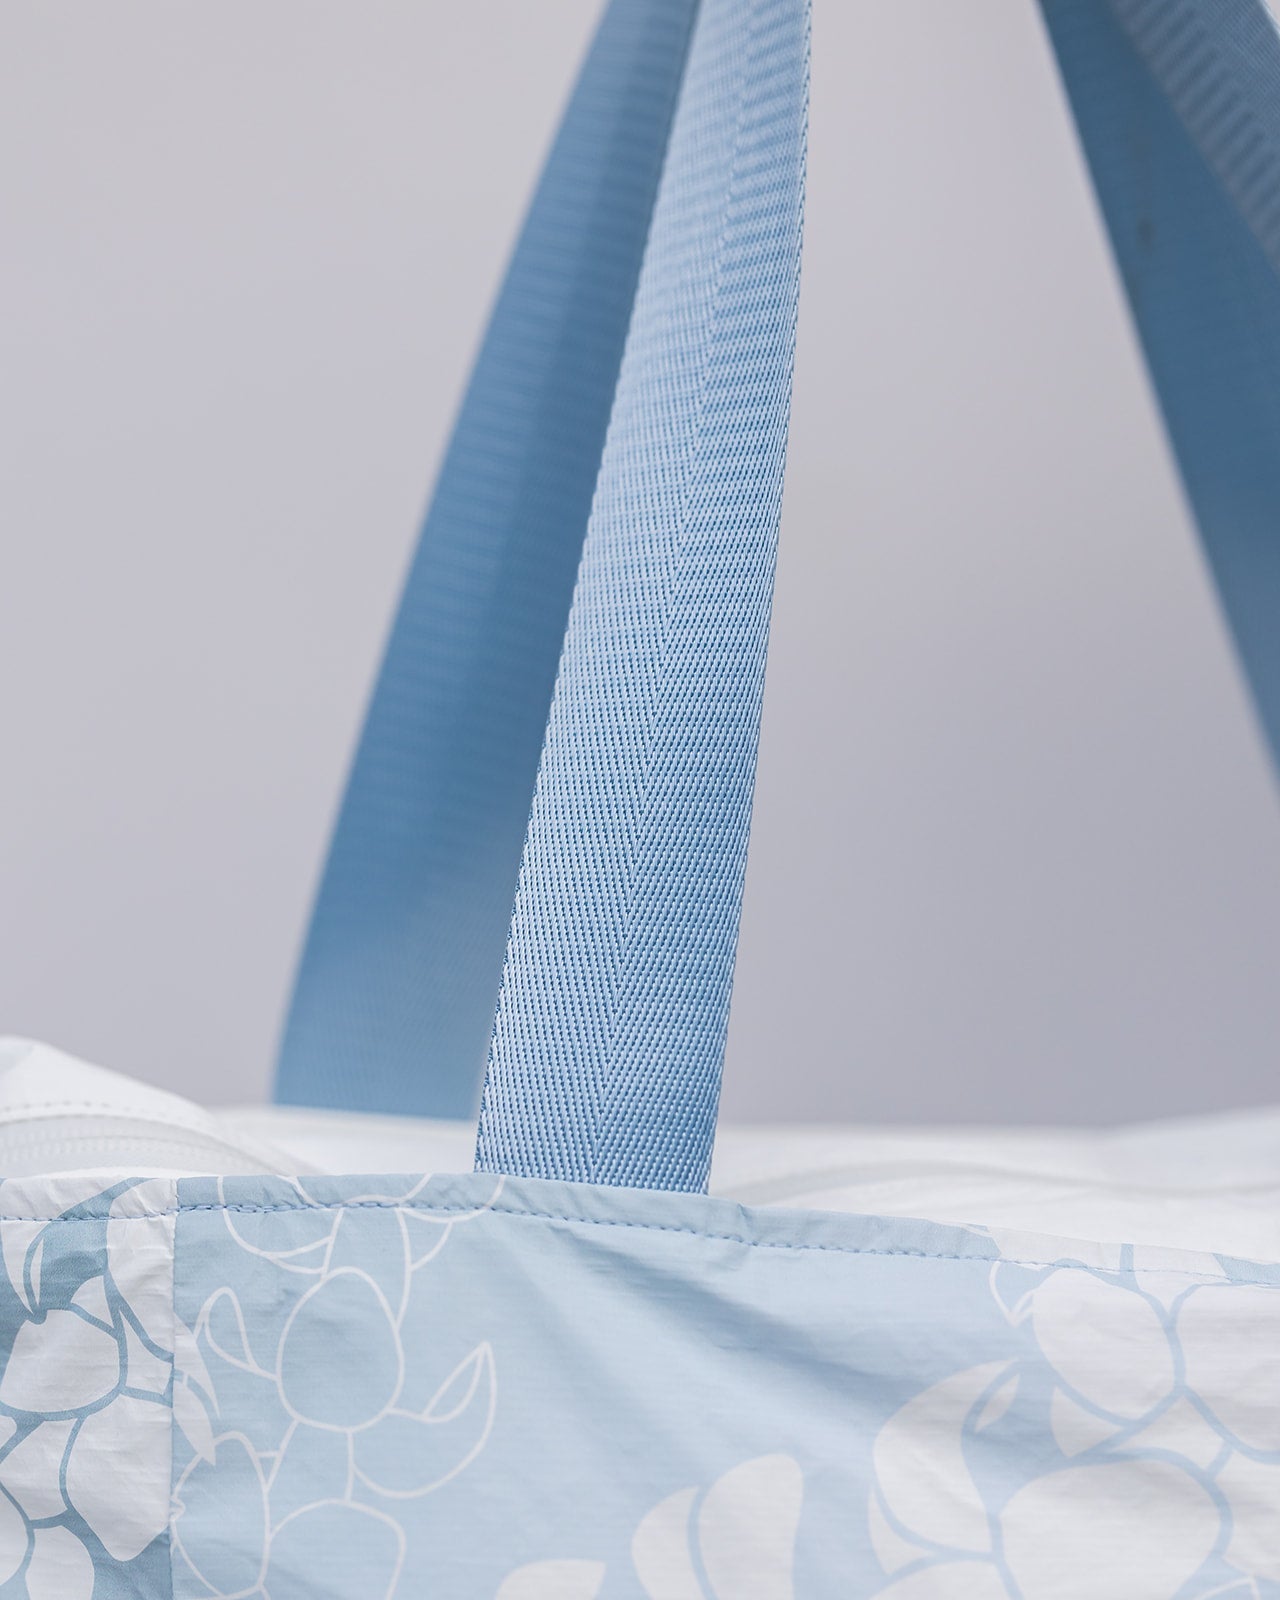 Wide, sturdy nylon tote straps in matching light blue color. 